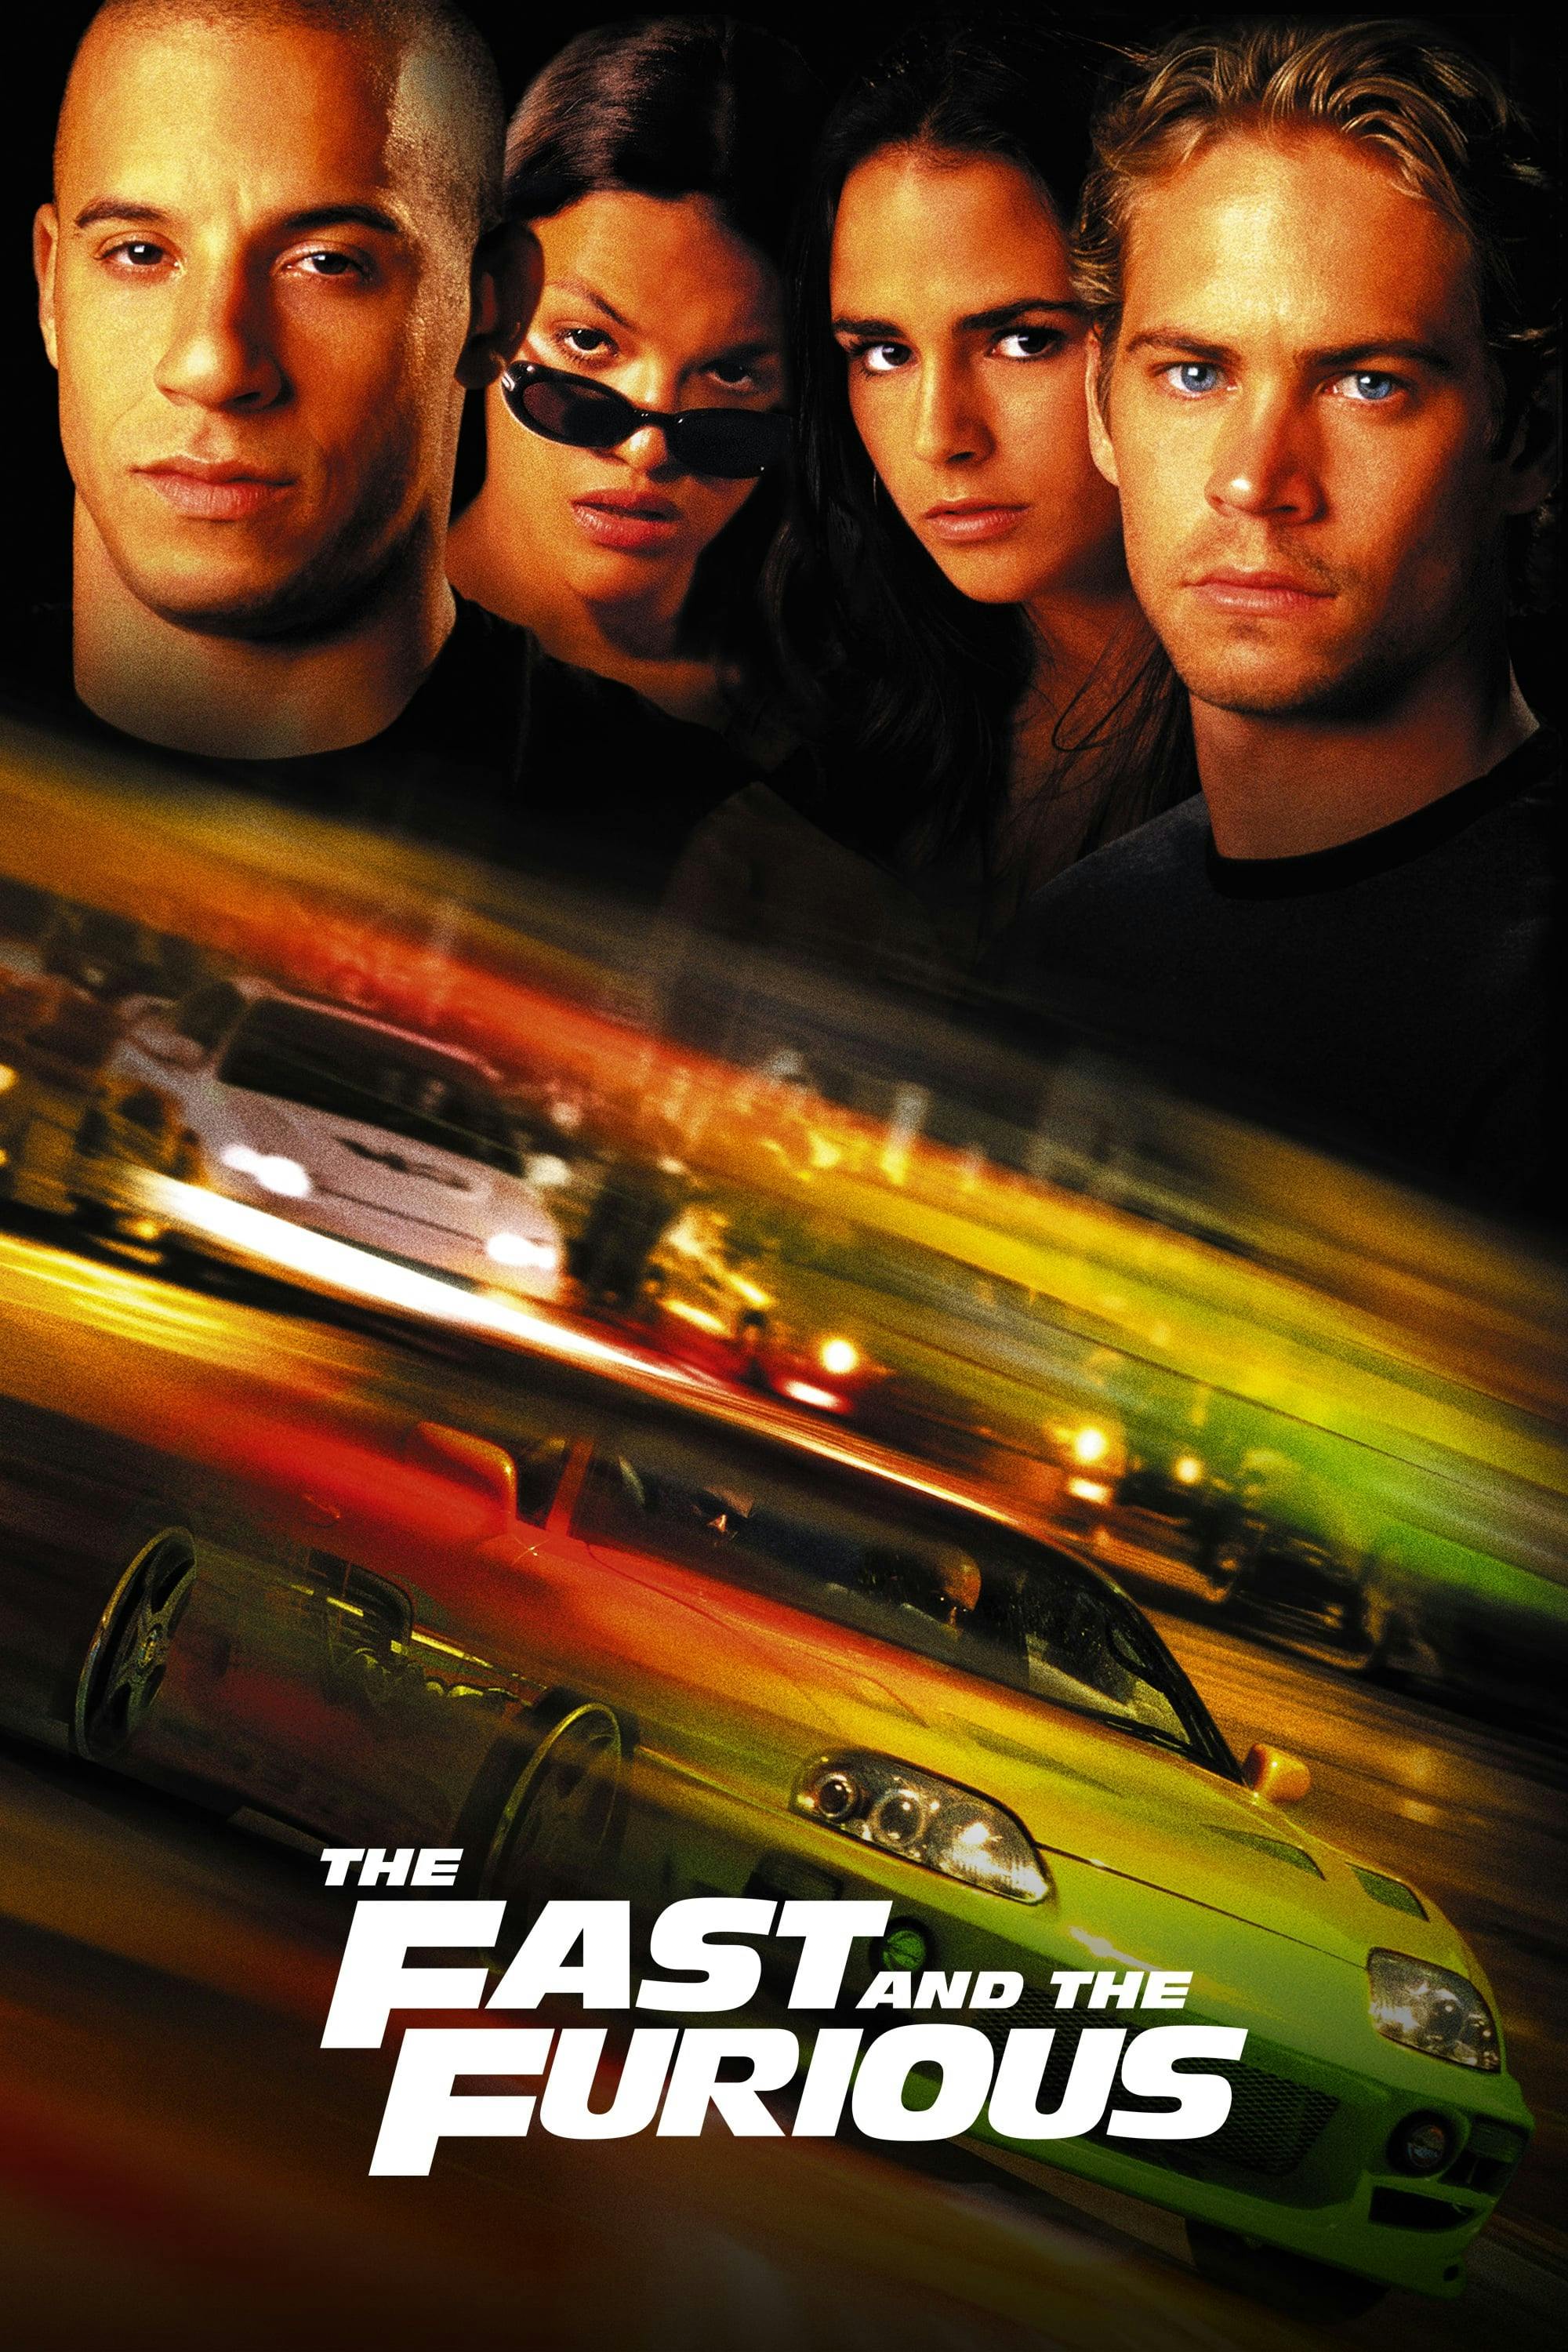 Best Paul Walker movies to watch on Amazon or iTunes